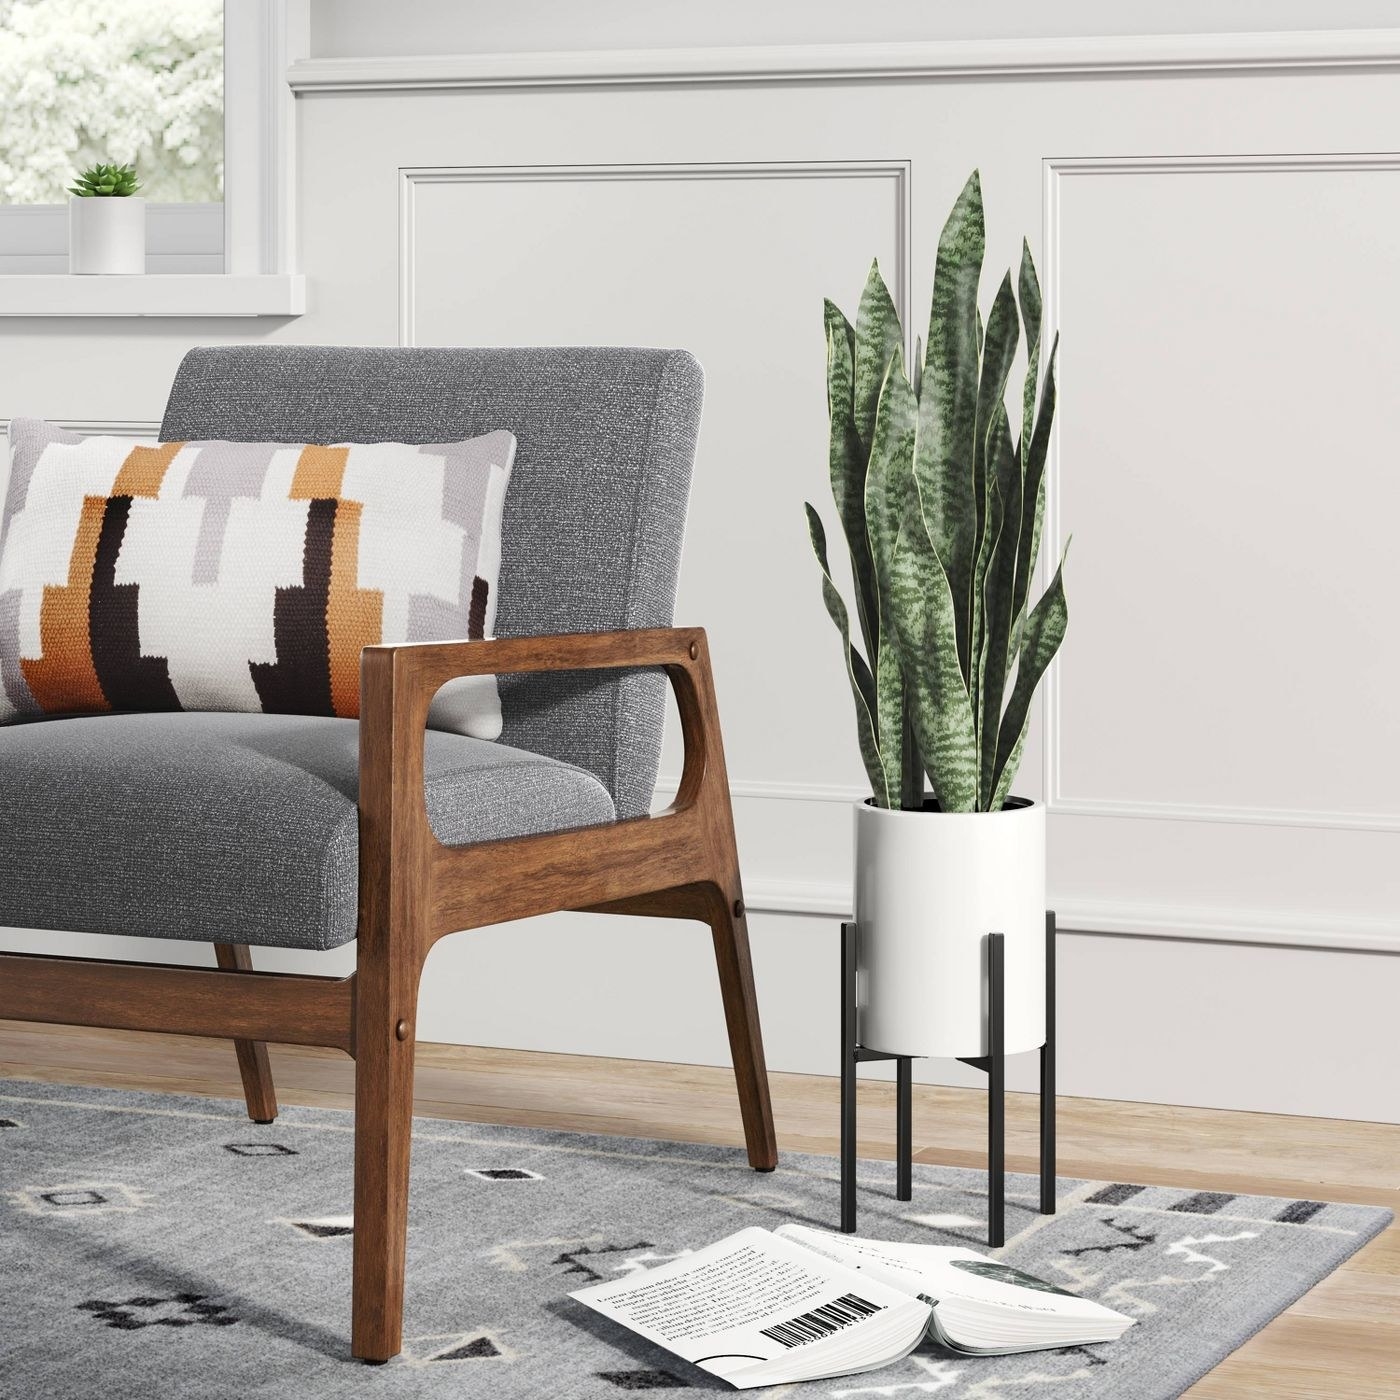 An artificial snake plant in a white stand with black legs in a living room